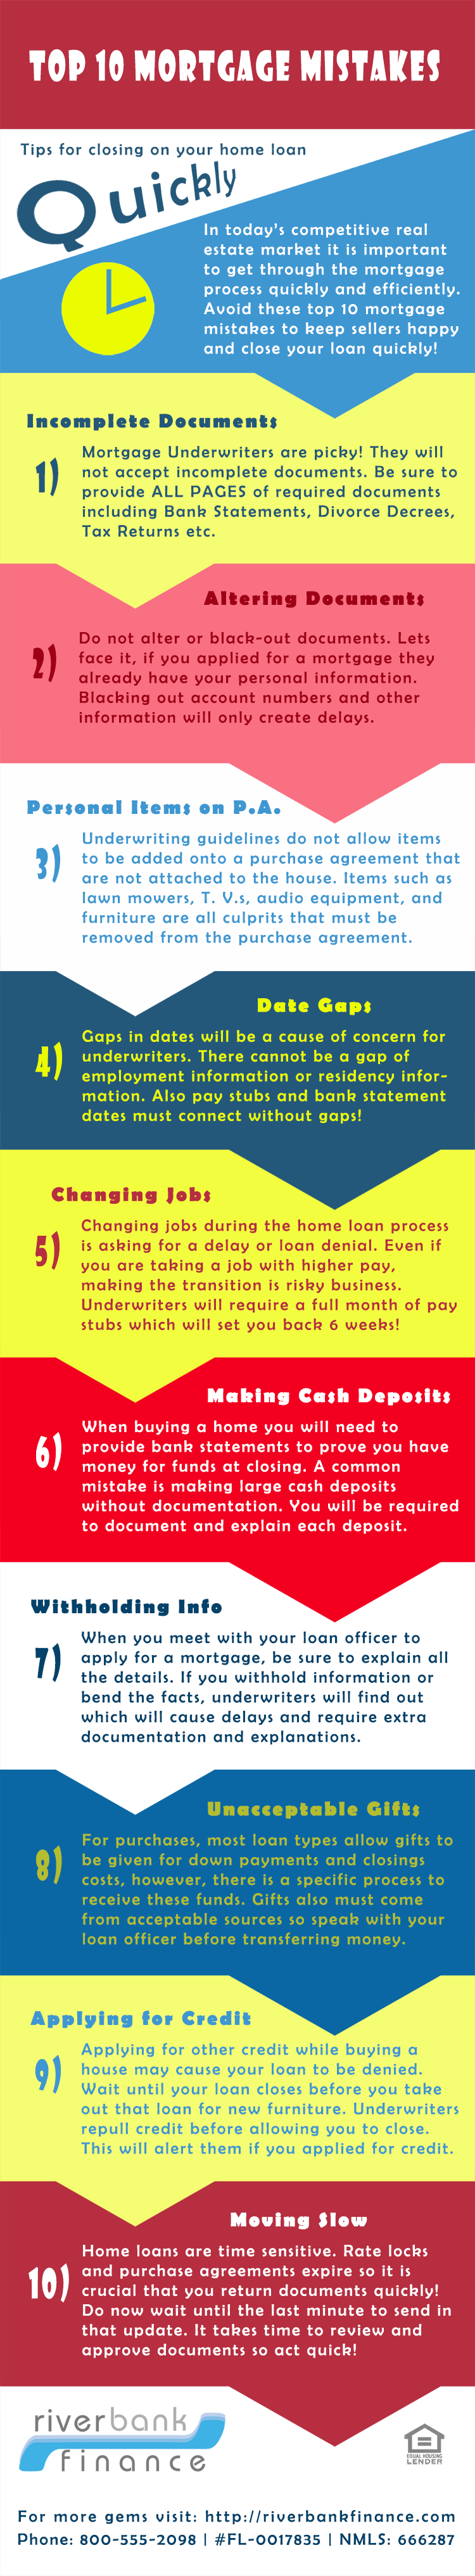 Top 10 mortgage mistakes that hold up the home loan process.